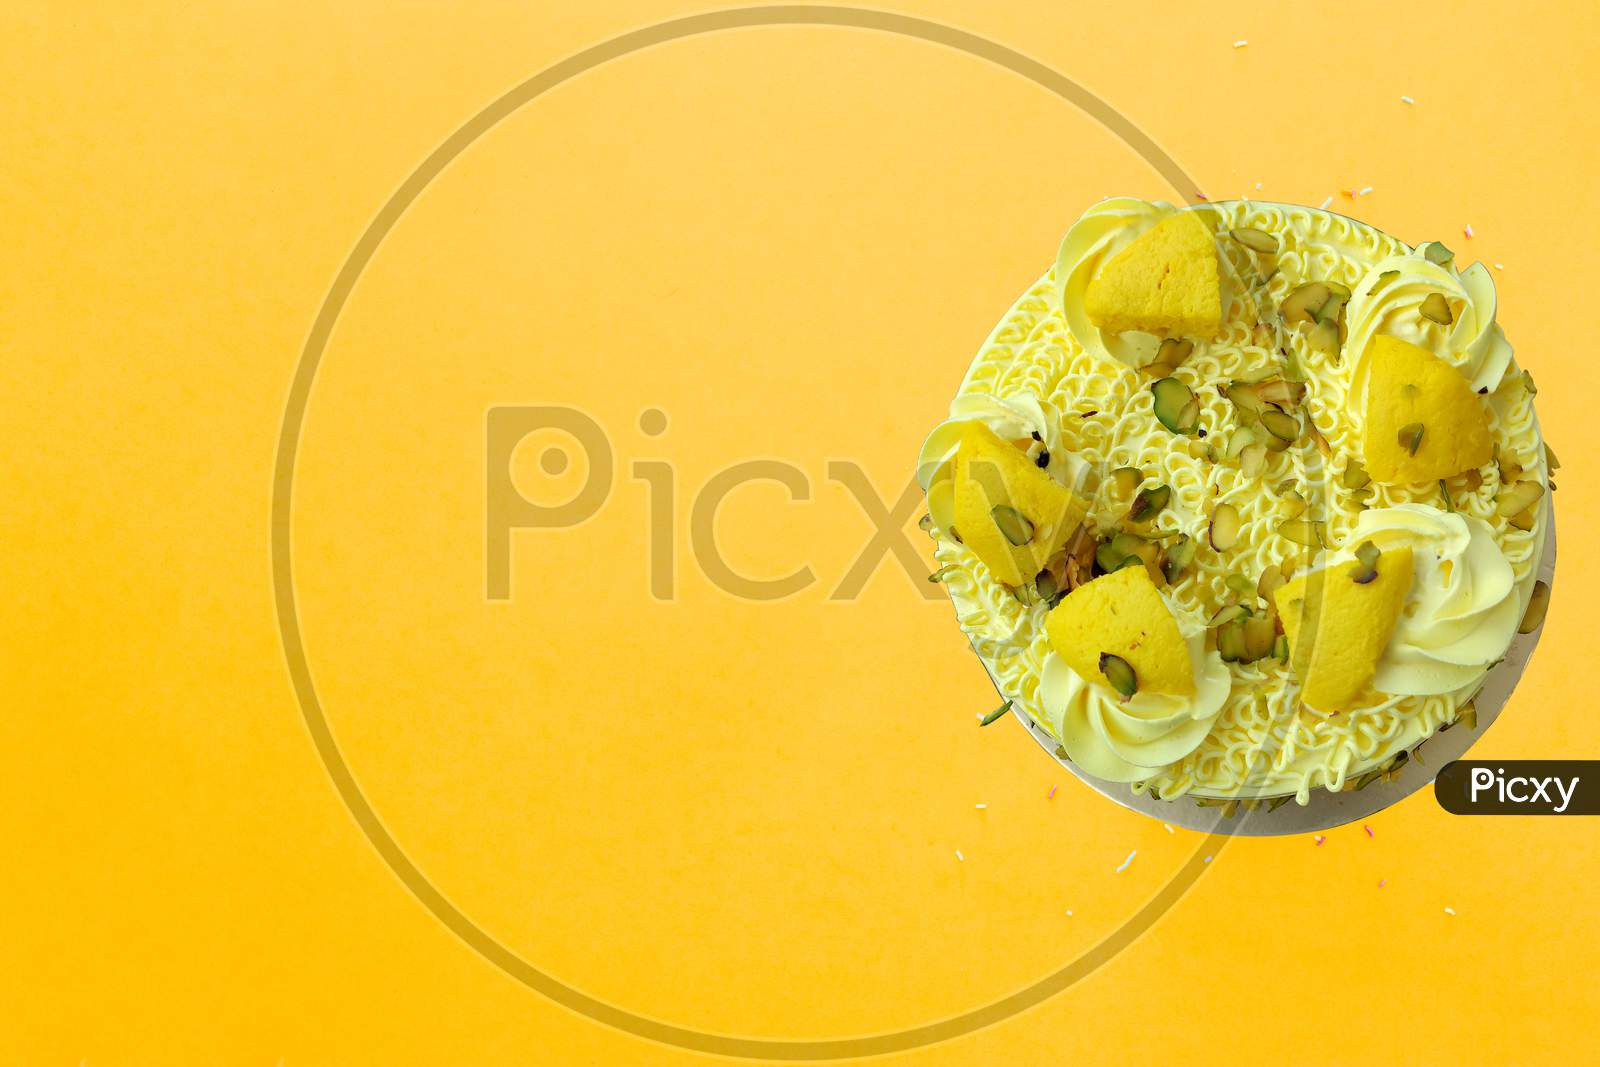 Colorful Birthday Cake With Sprinkles On A Yellow Background With Copyspace